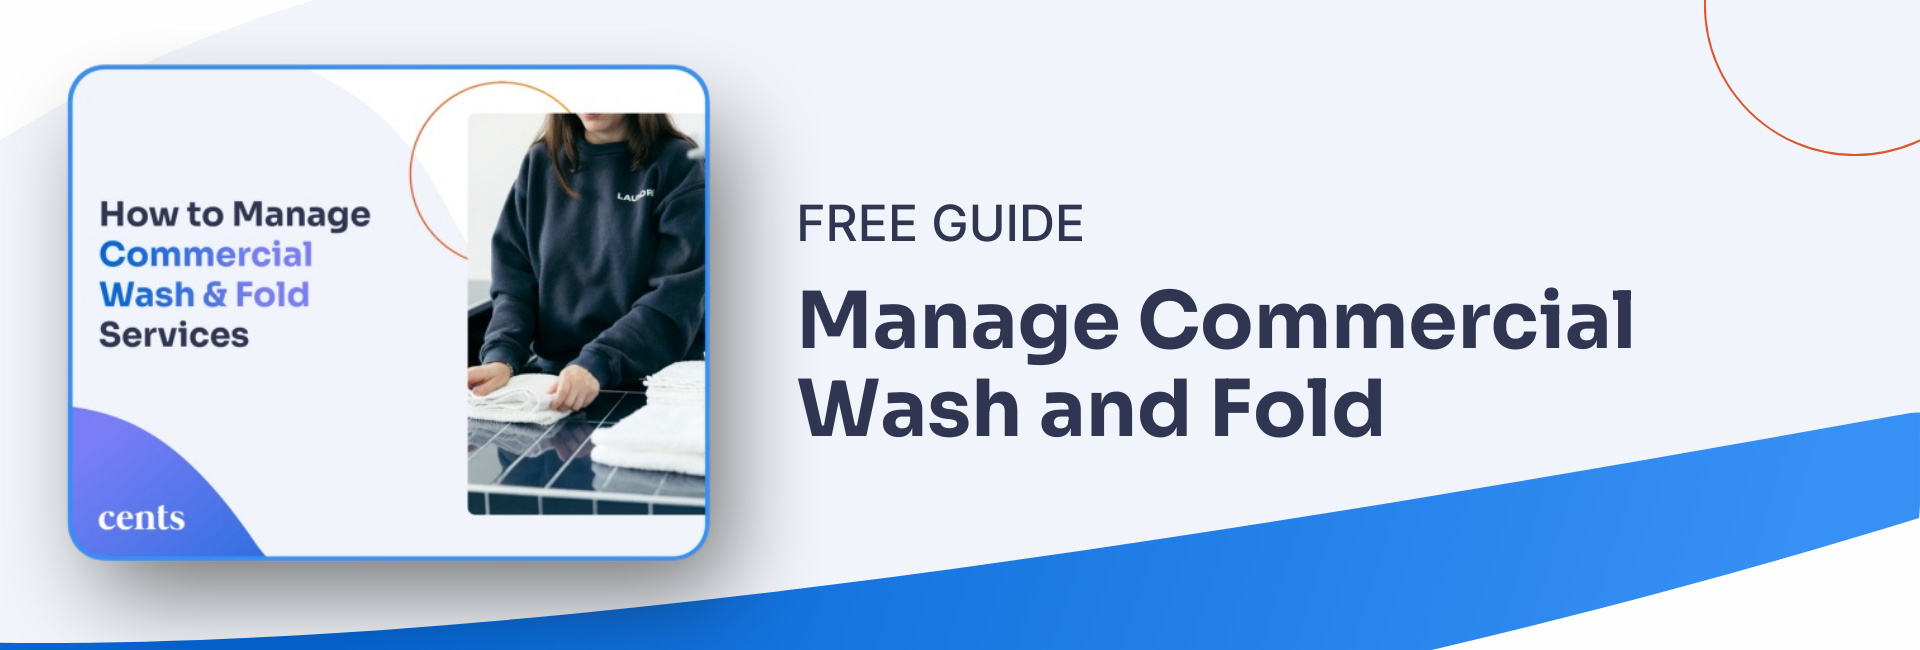 In-line Blog CTA - Manage Commercial Wash & Fold